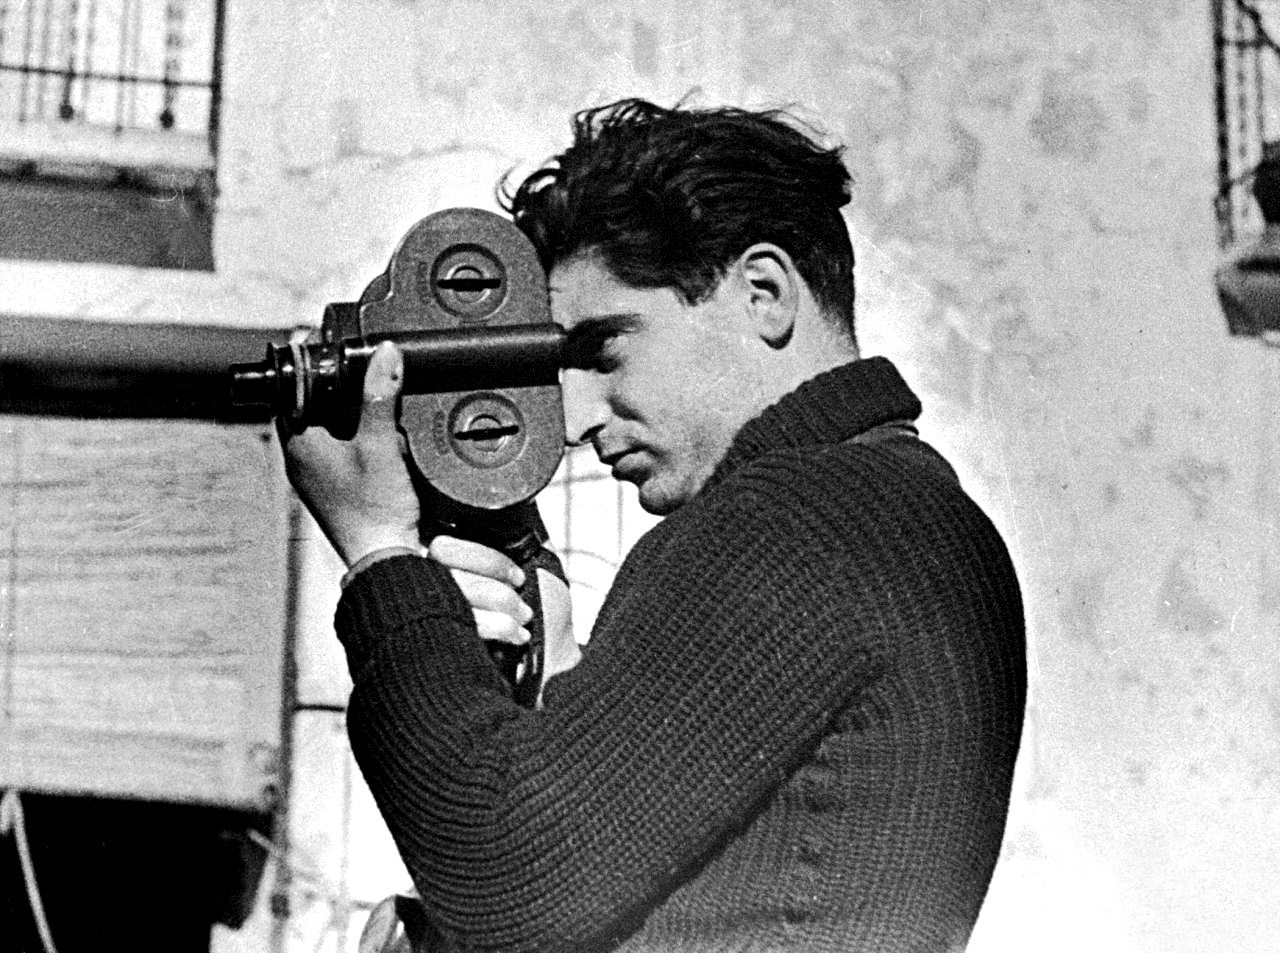 Capa on assignment in Spain, using a [[Eyemo]] 35 mm movie camera, photographed by [[Gerda Taro]]